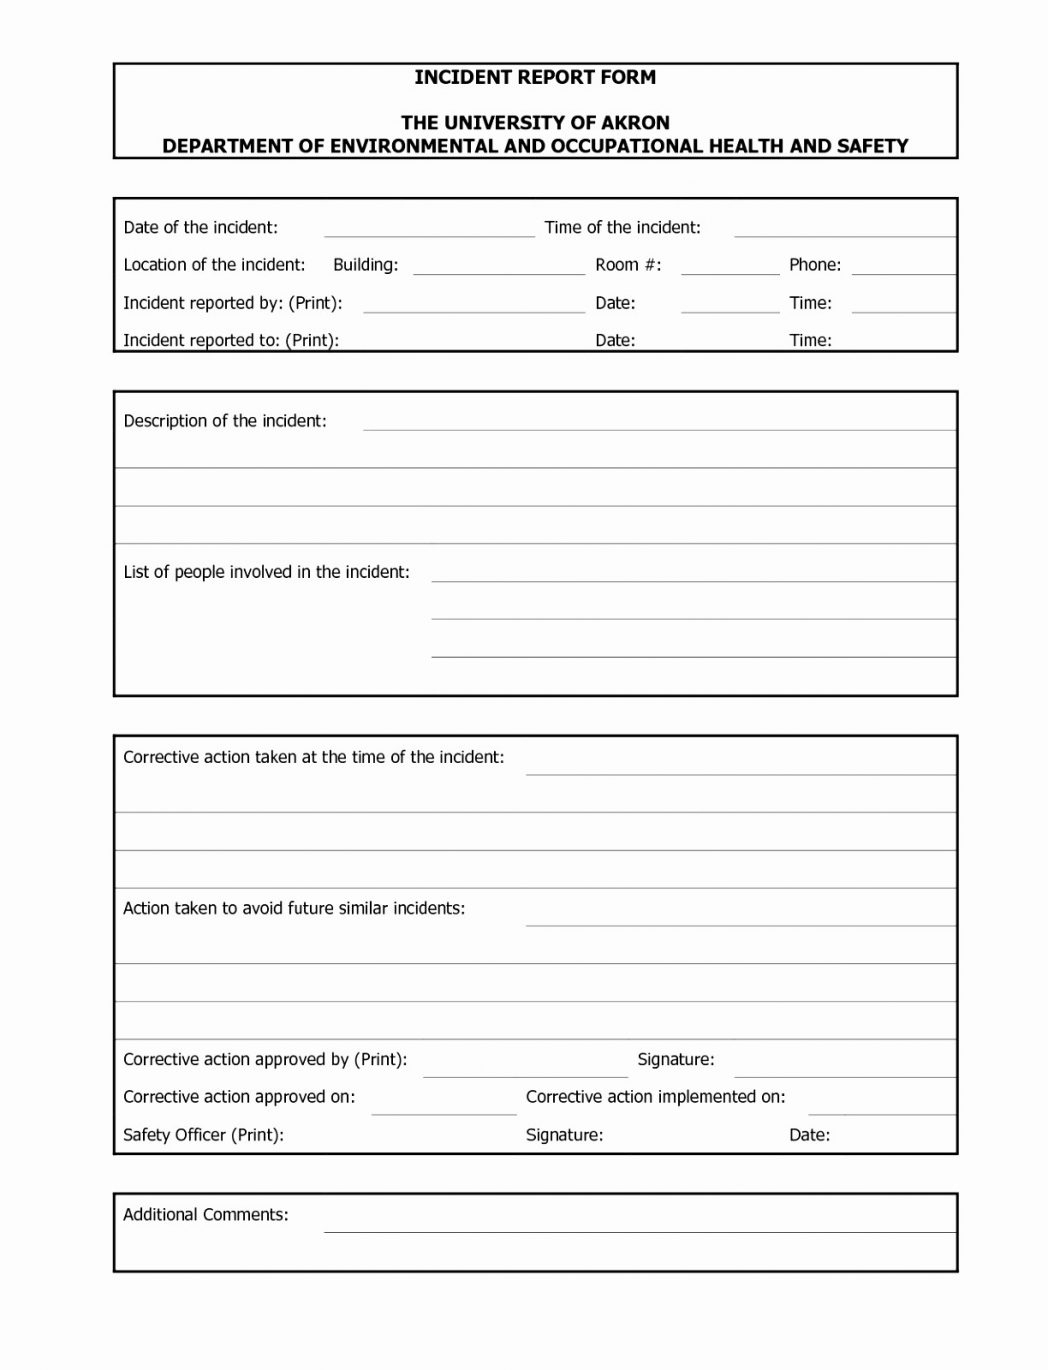 Incident Report E Word Employee Form Jpg Wordlate Image With Incident Report Template Microsoft